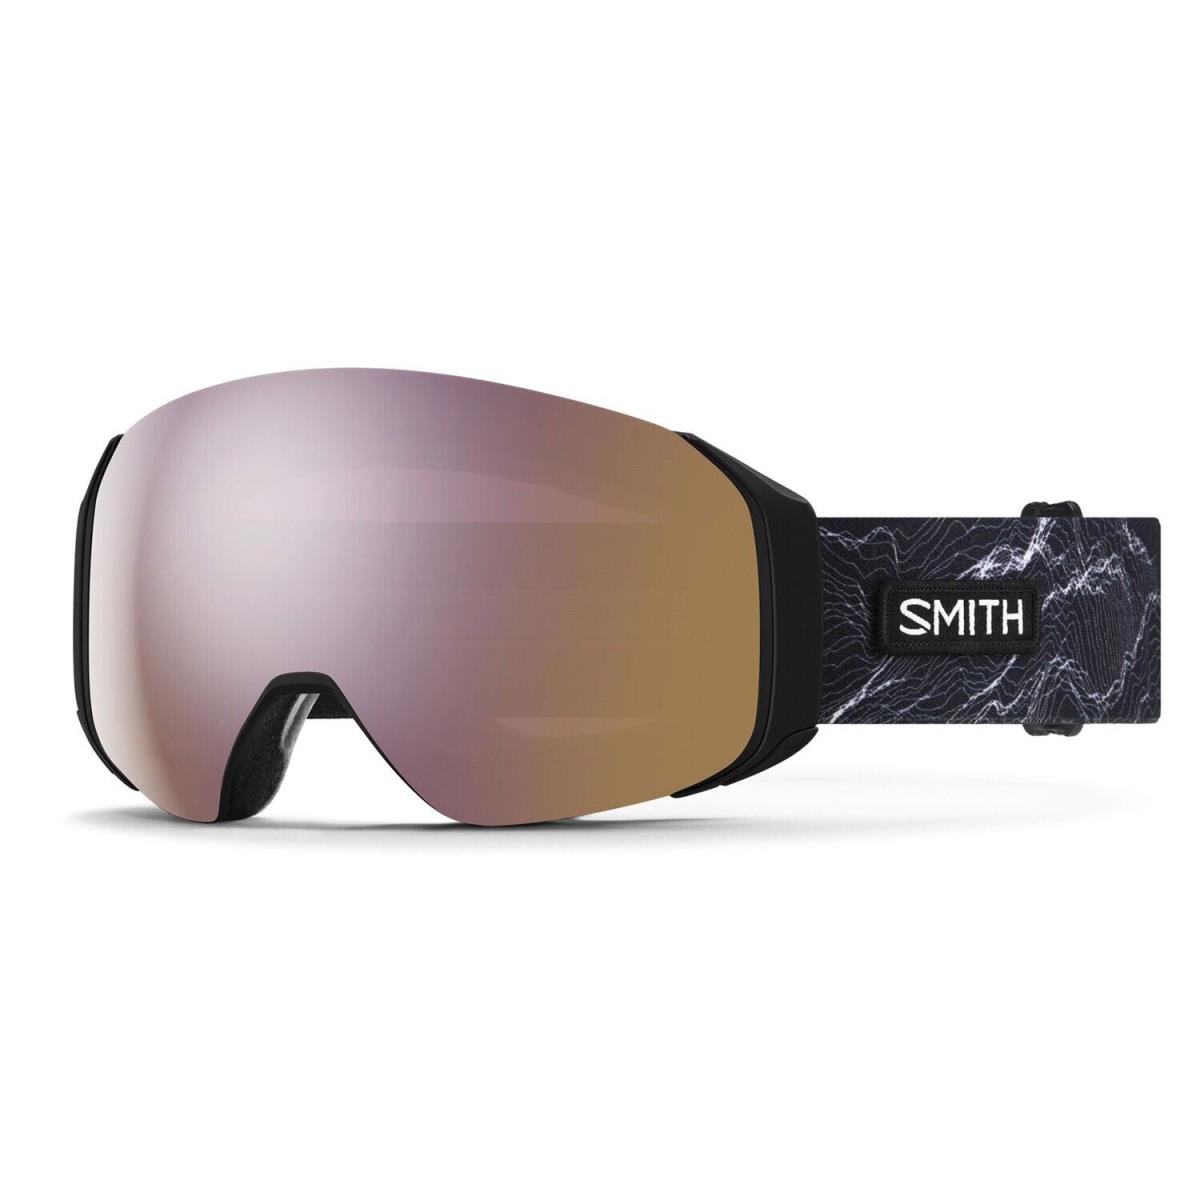 Smith 4D Mag S Snow Goggles AC Hadley Hammer Everyday Rose Gold Mirror Lens